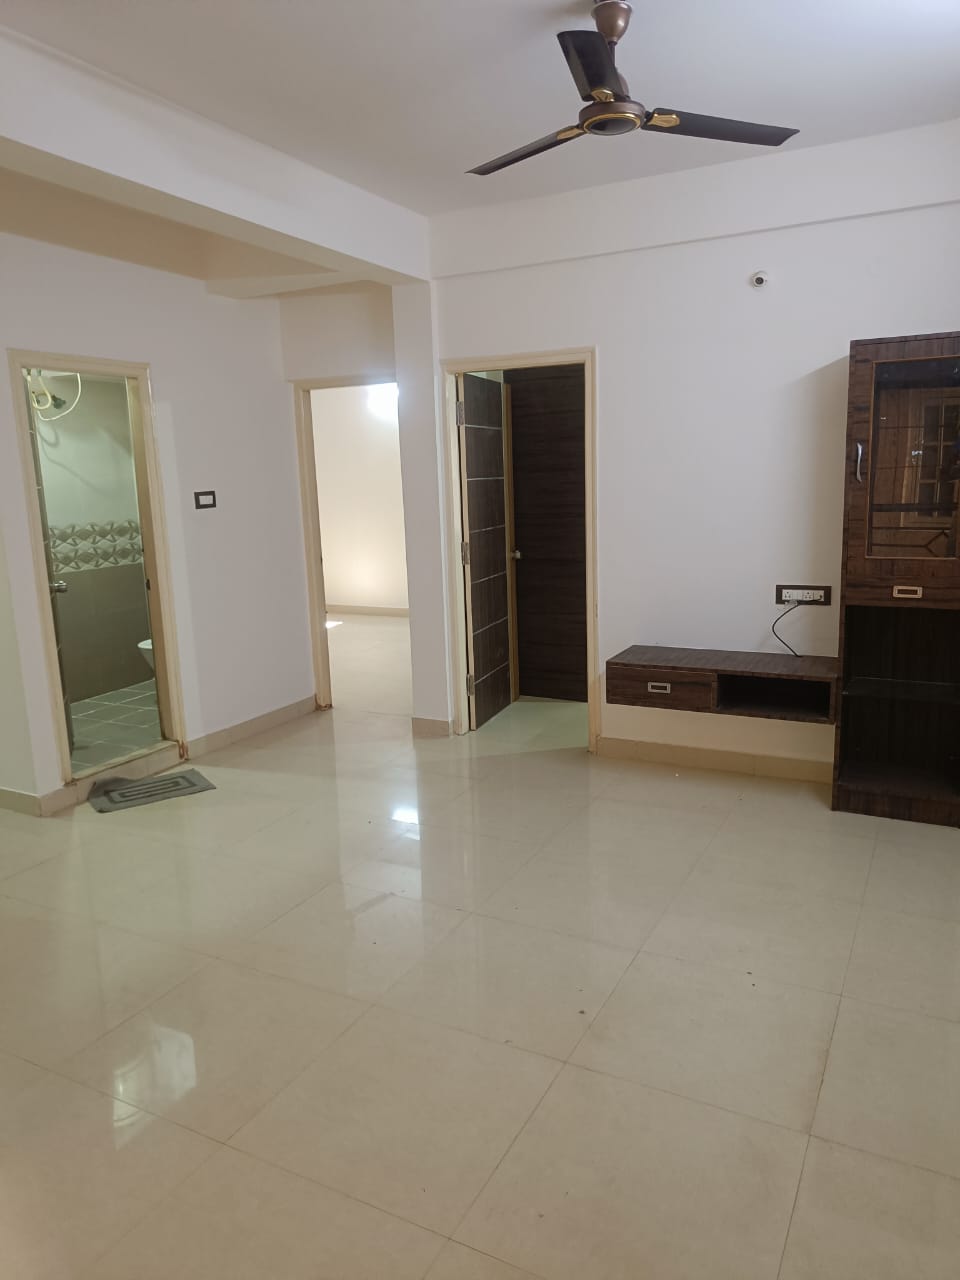 3 BHK Residential Apartment for Lease Only at JAML2 - 2691 in Kammanahalli